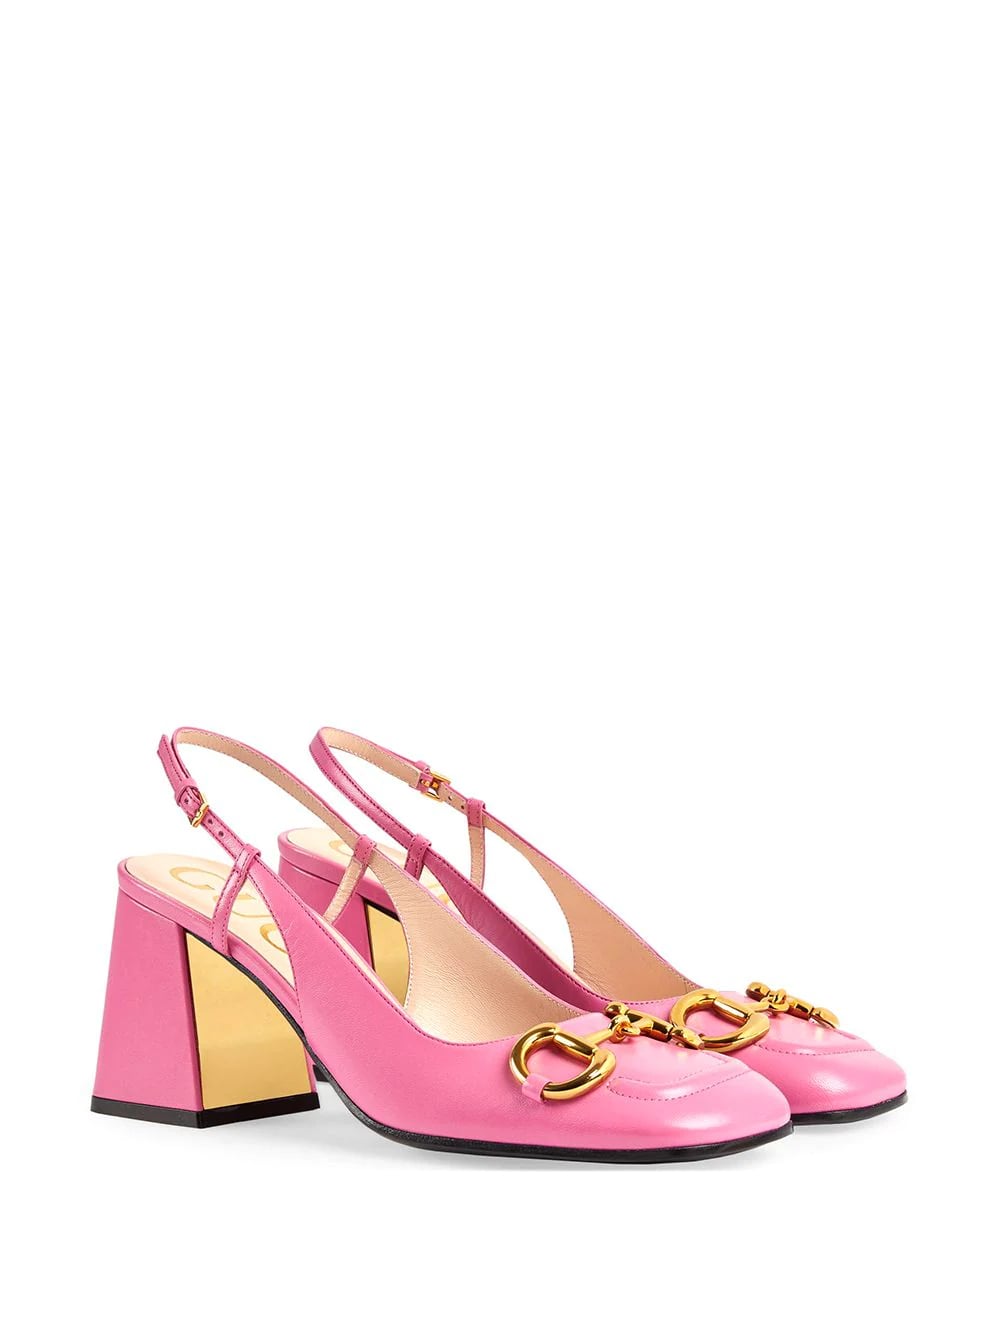 Gucci Horsebit Slingback Pumps | 18 Slingback Heels That Are Comfy, Cute,  and Perfect For Summer | POPSUGAR Fashion Photo 8